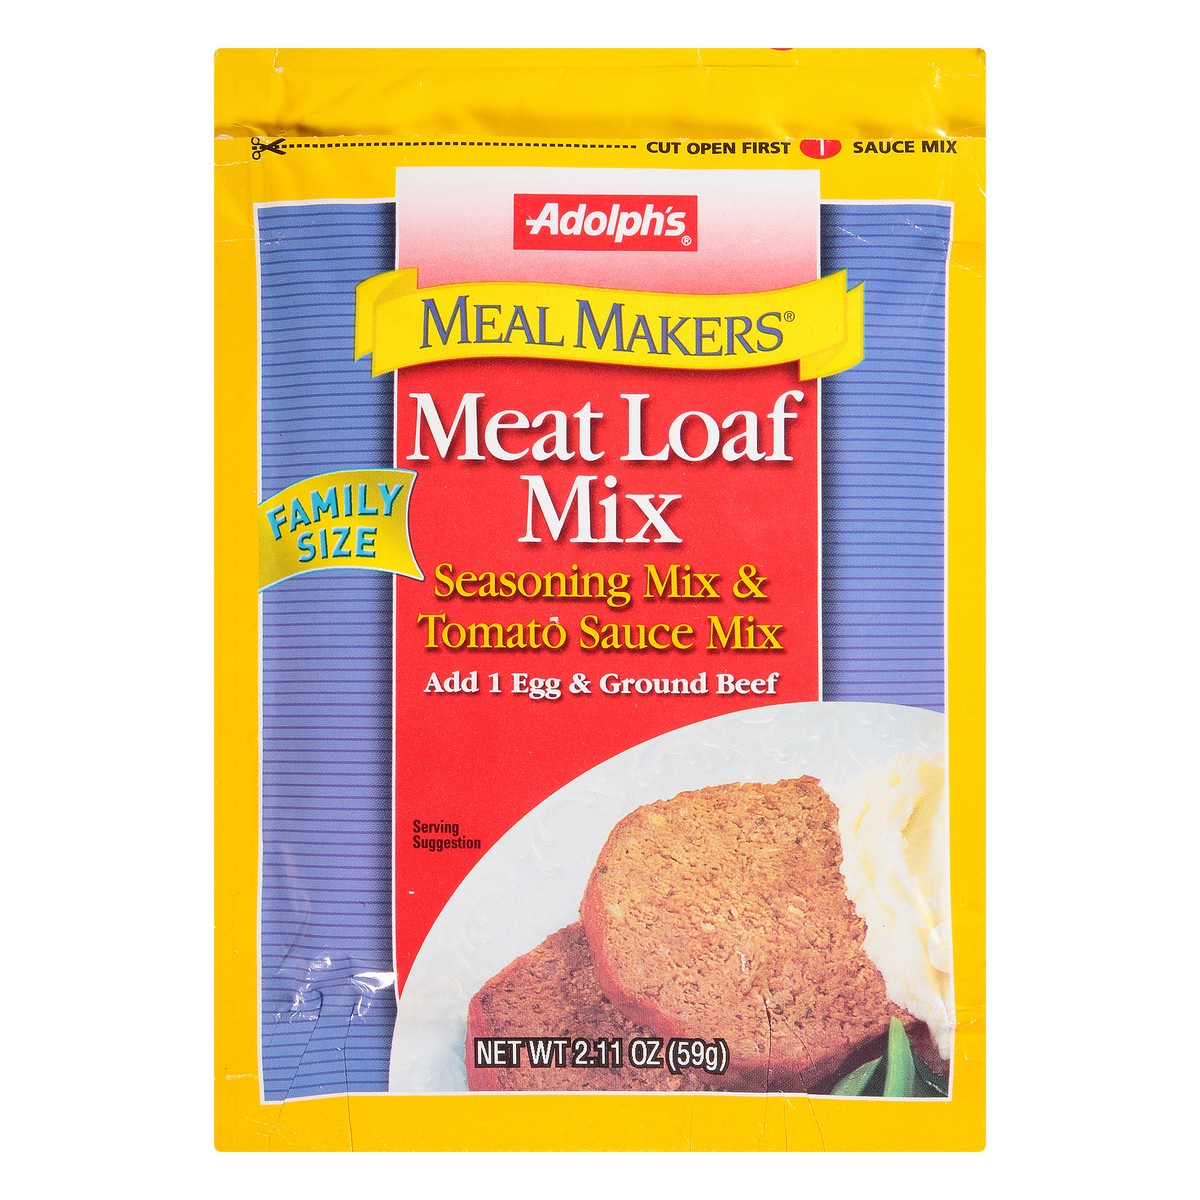 slide 1 of 8, Adolph's Adolph's Meal Makers Meat Loaf Mix Seasoning Mix Tomato Sauce Mix, 2.11 oz